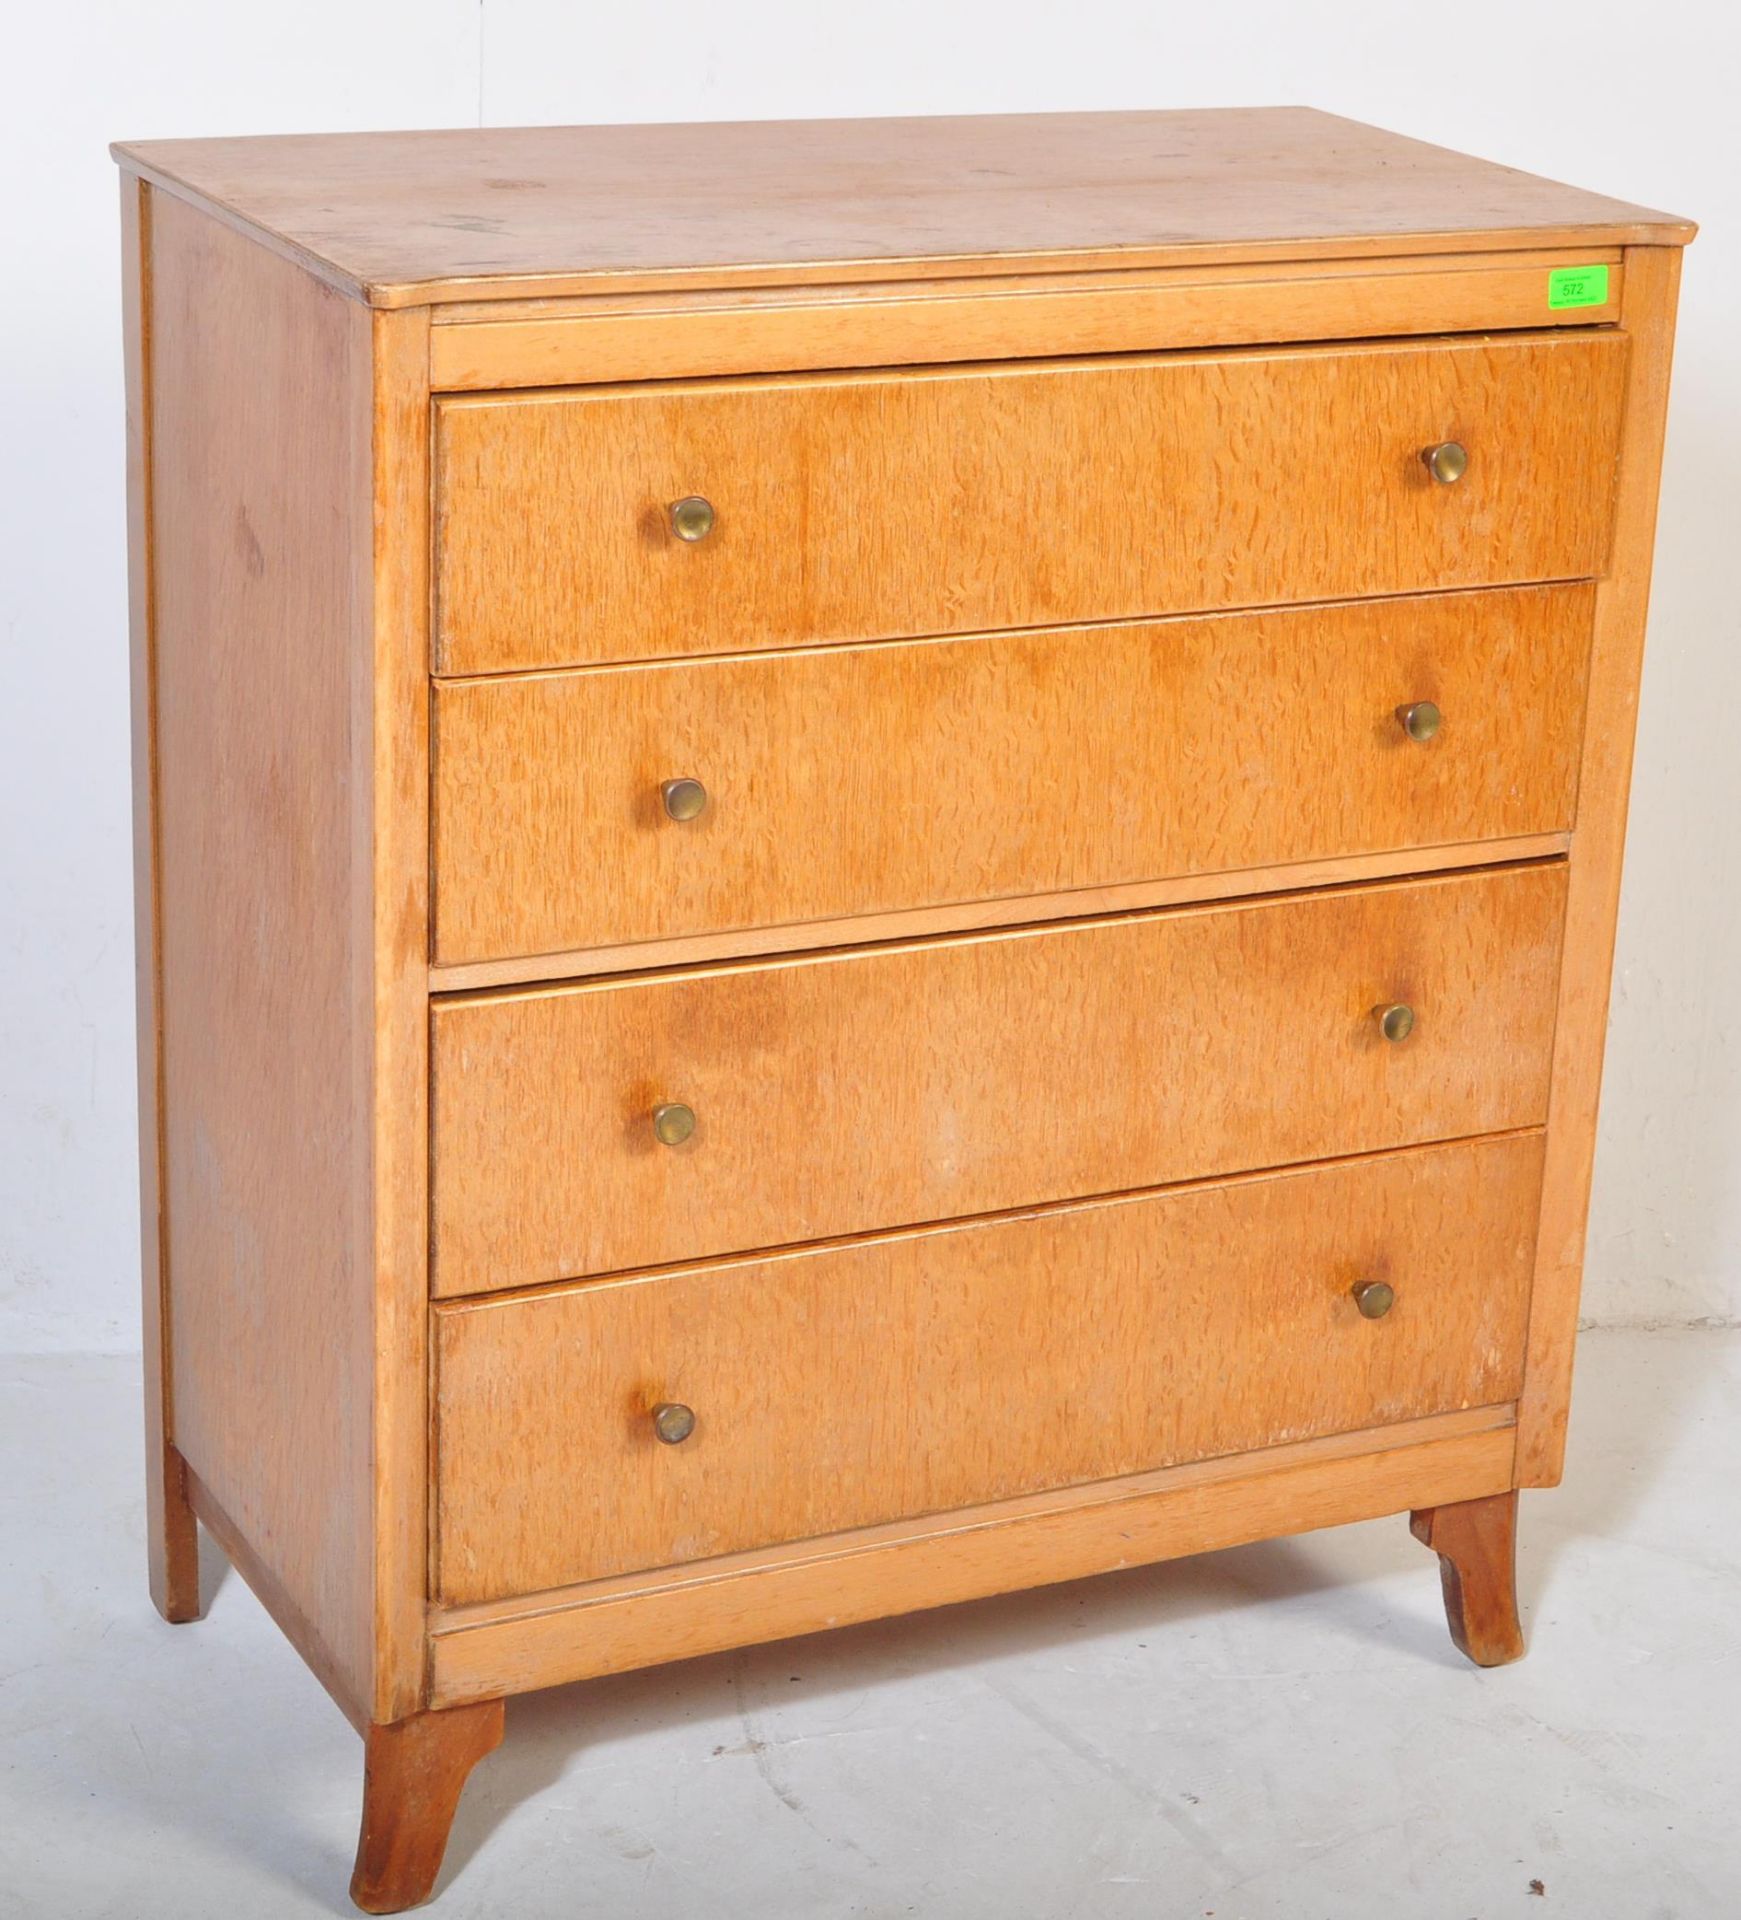 RETRO LEBUS FURNITURE MID CENTURY CHEST OF DRAWERS - Image 2 of 4